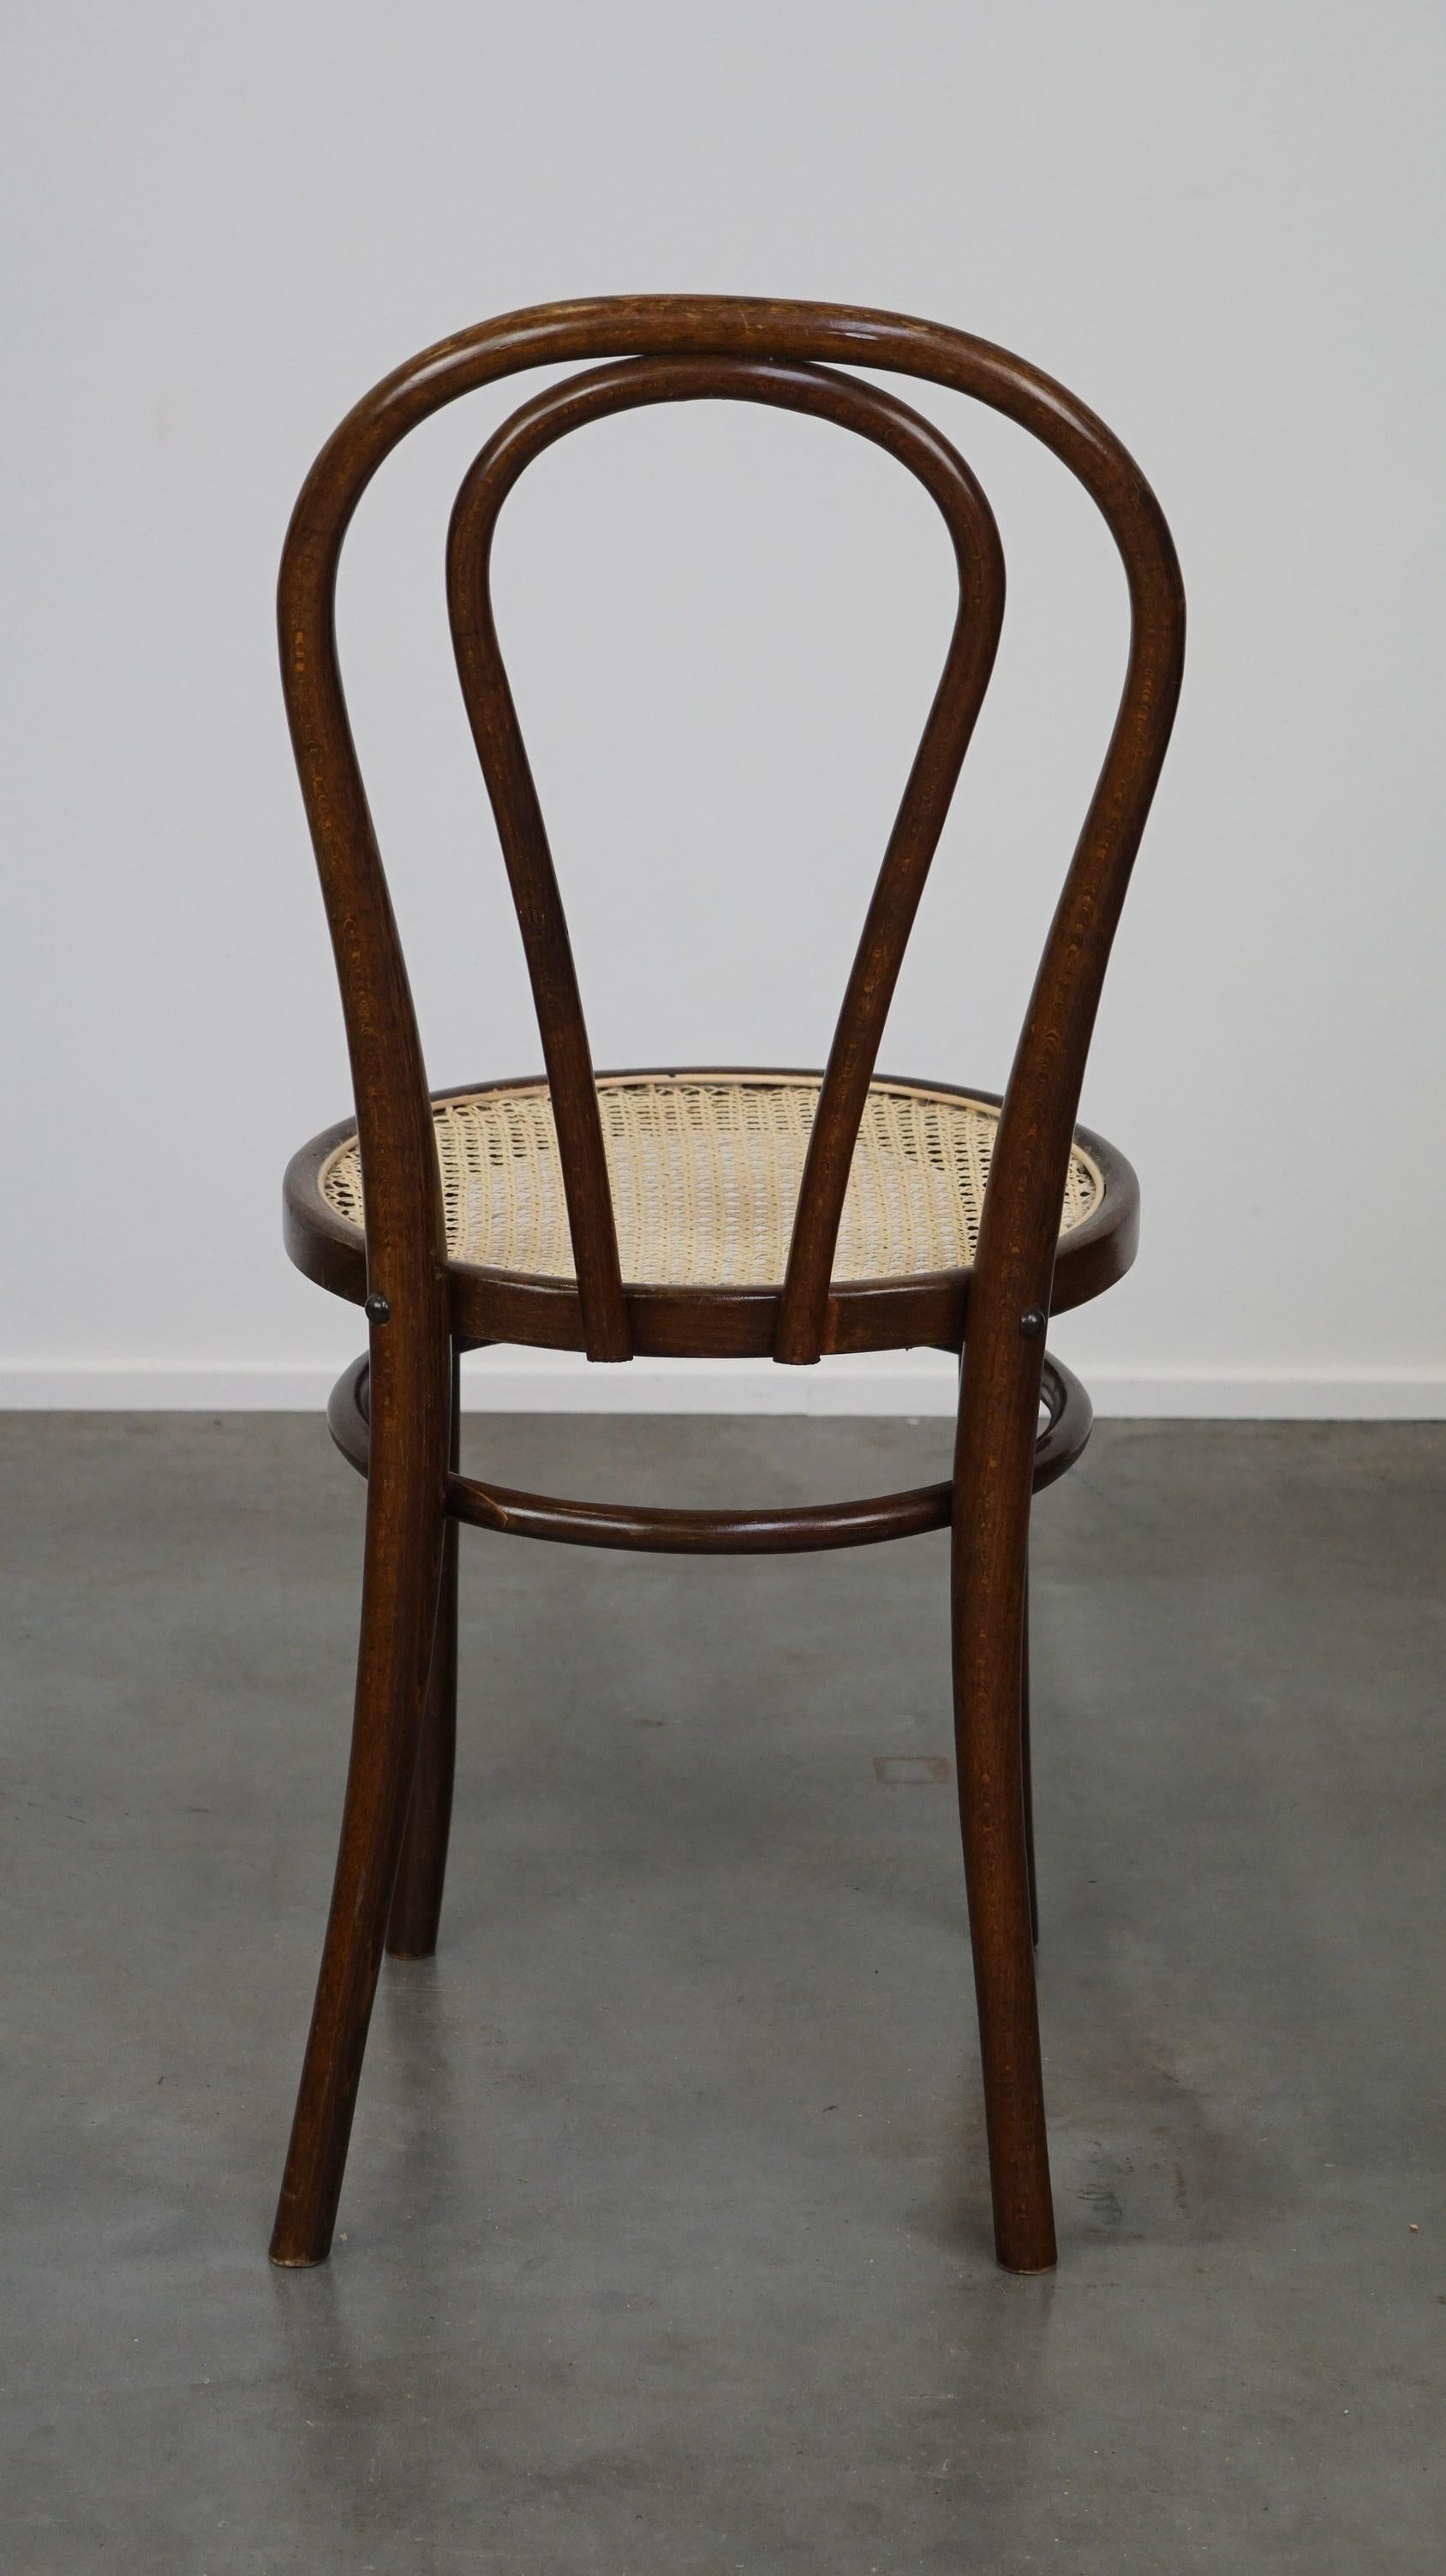 20th Century Original antique bentwood Thonet chair model no. 18 with a new woven seat For Sale